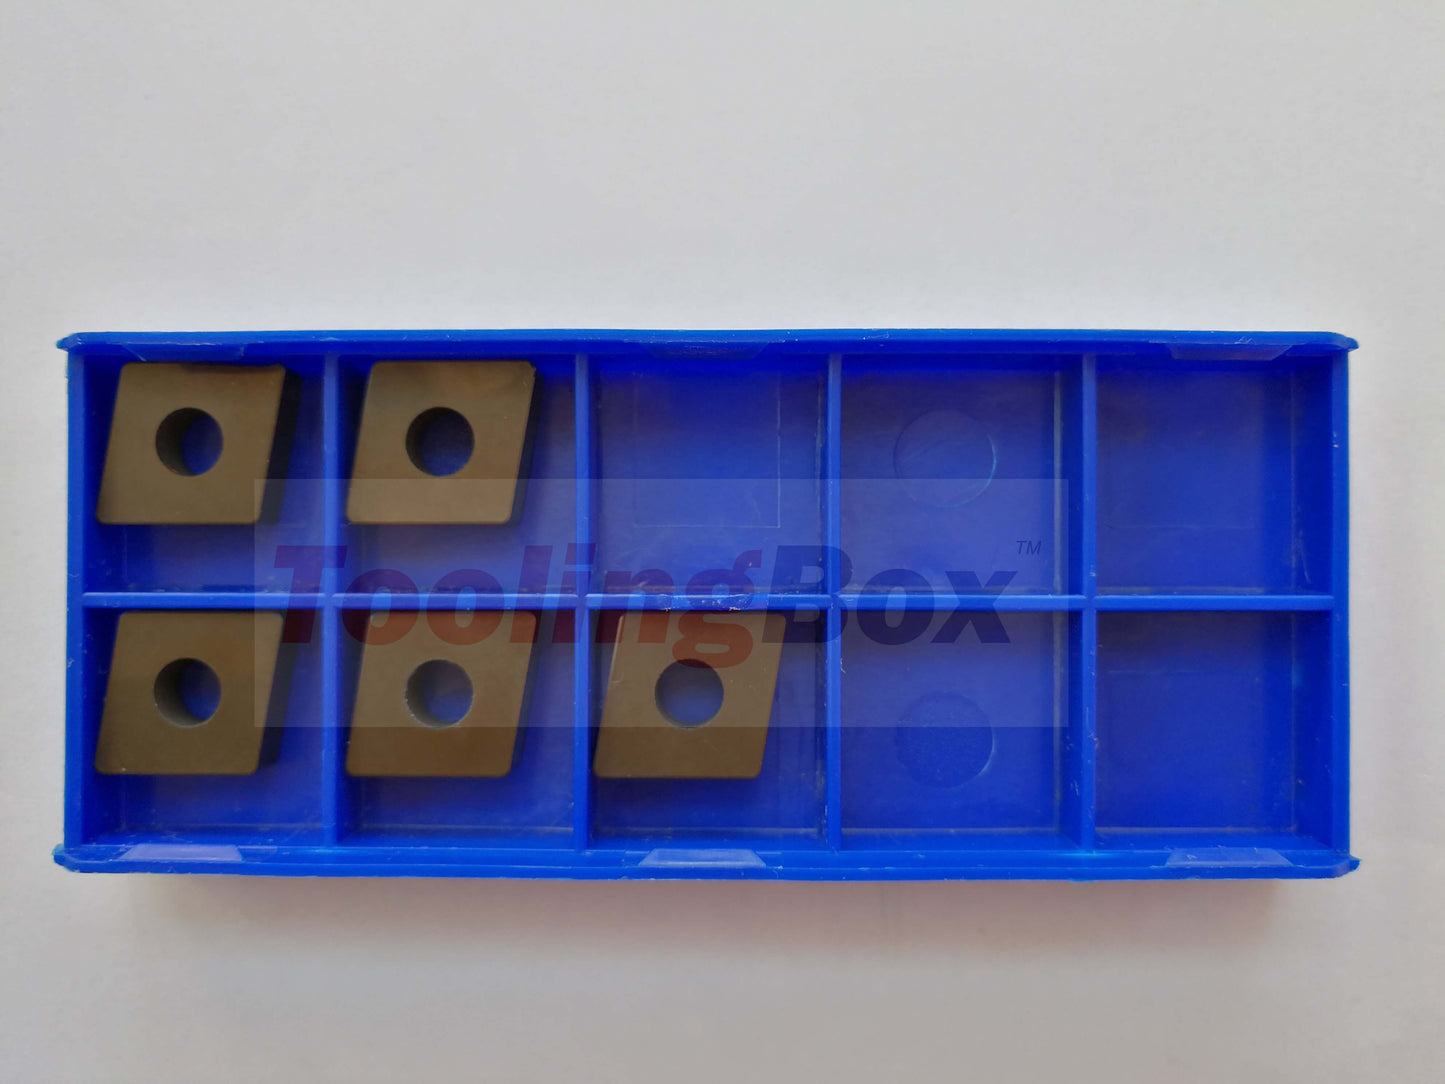 10 pcs packing full CBN inserts CNMG 1204 TB100 with straight hole